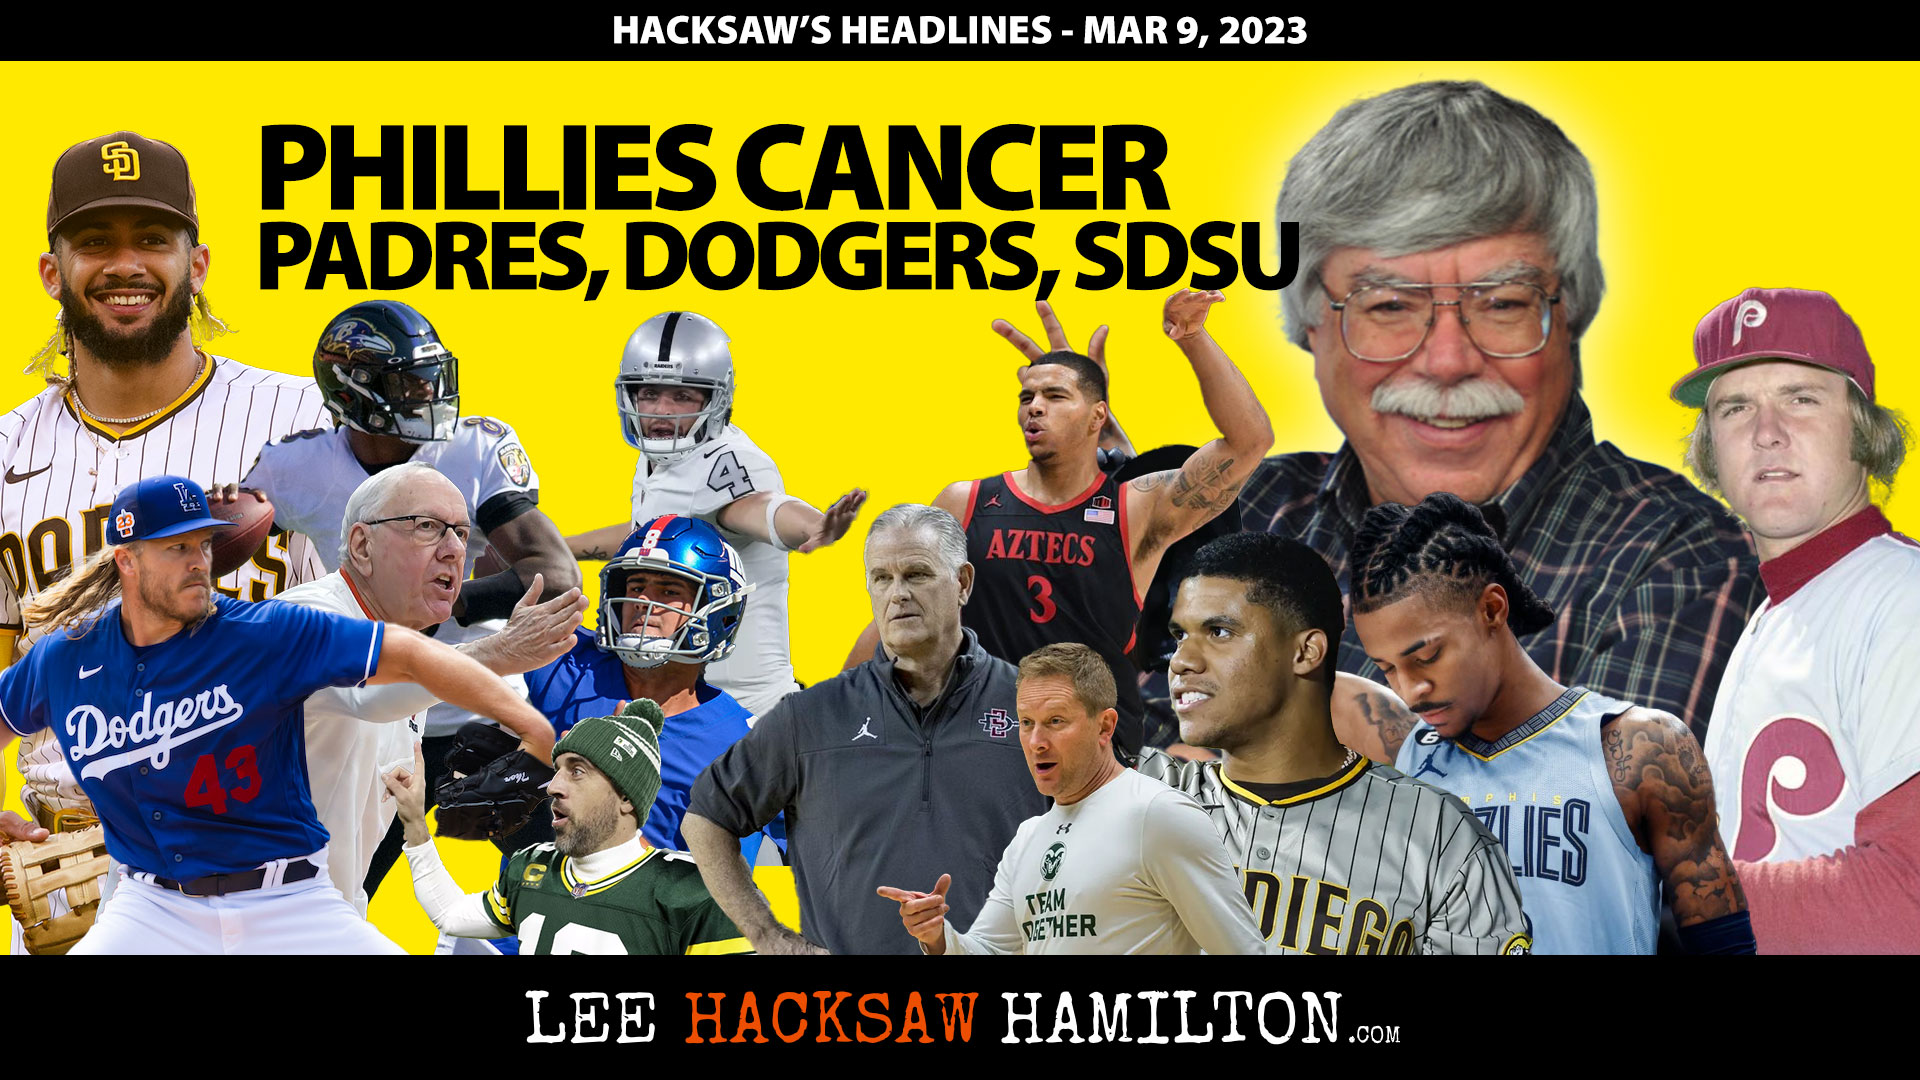 Lee Hacksaw Hamilton discusses Phillies Cancer, Juan Soto Contract, Padres, Dodgers, Aztecs, UCLA, March Madness, and NFL QBs